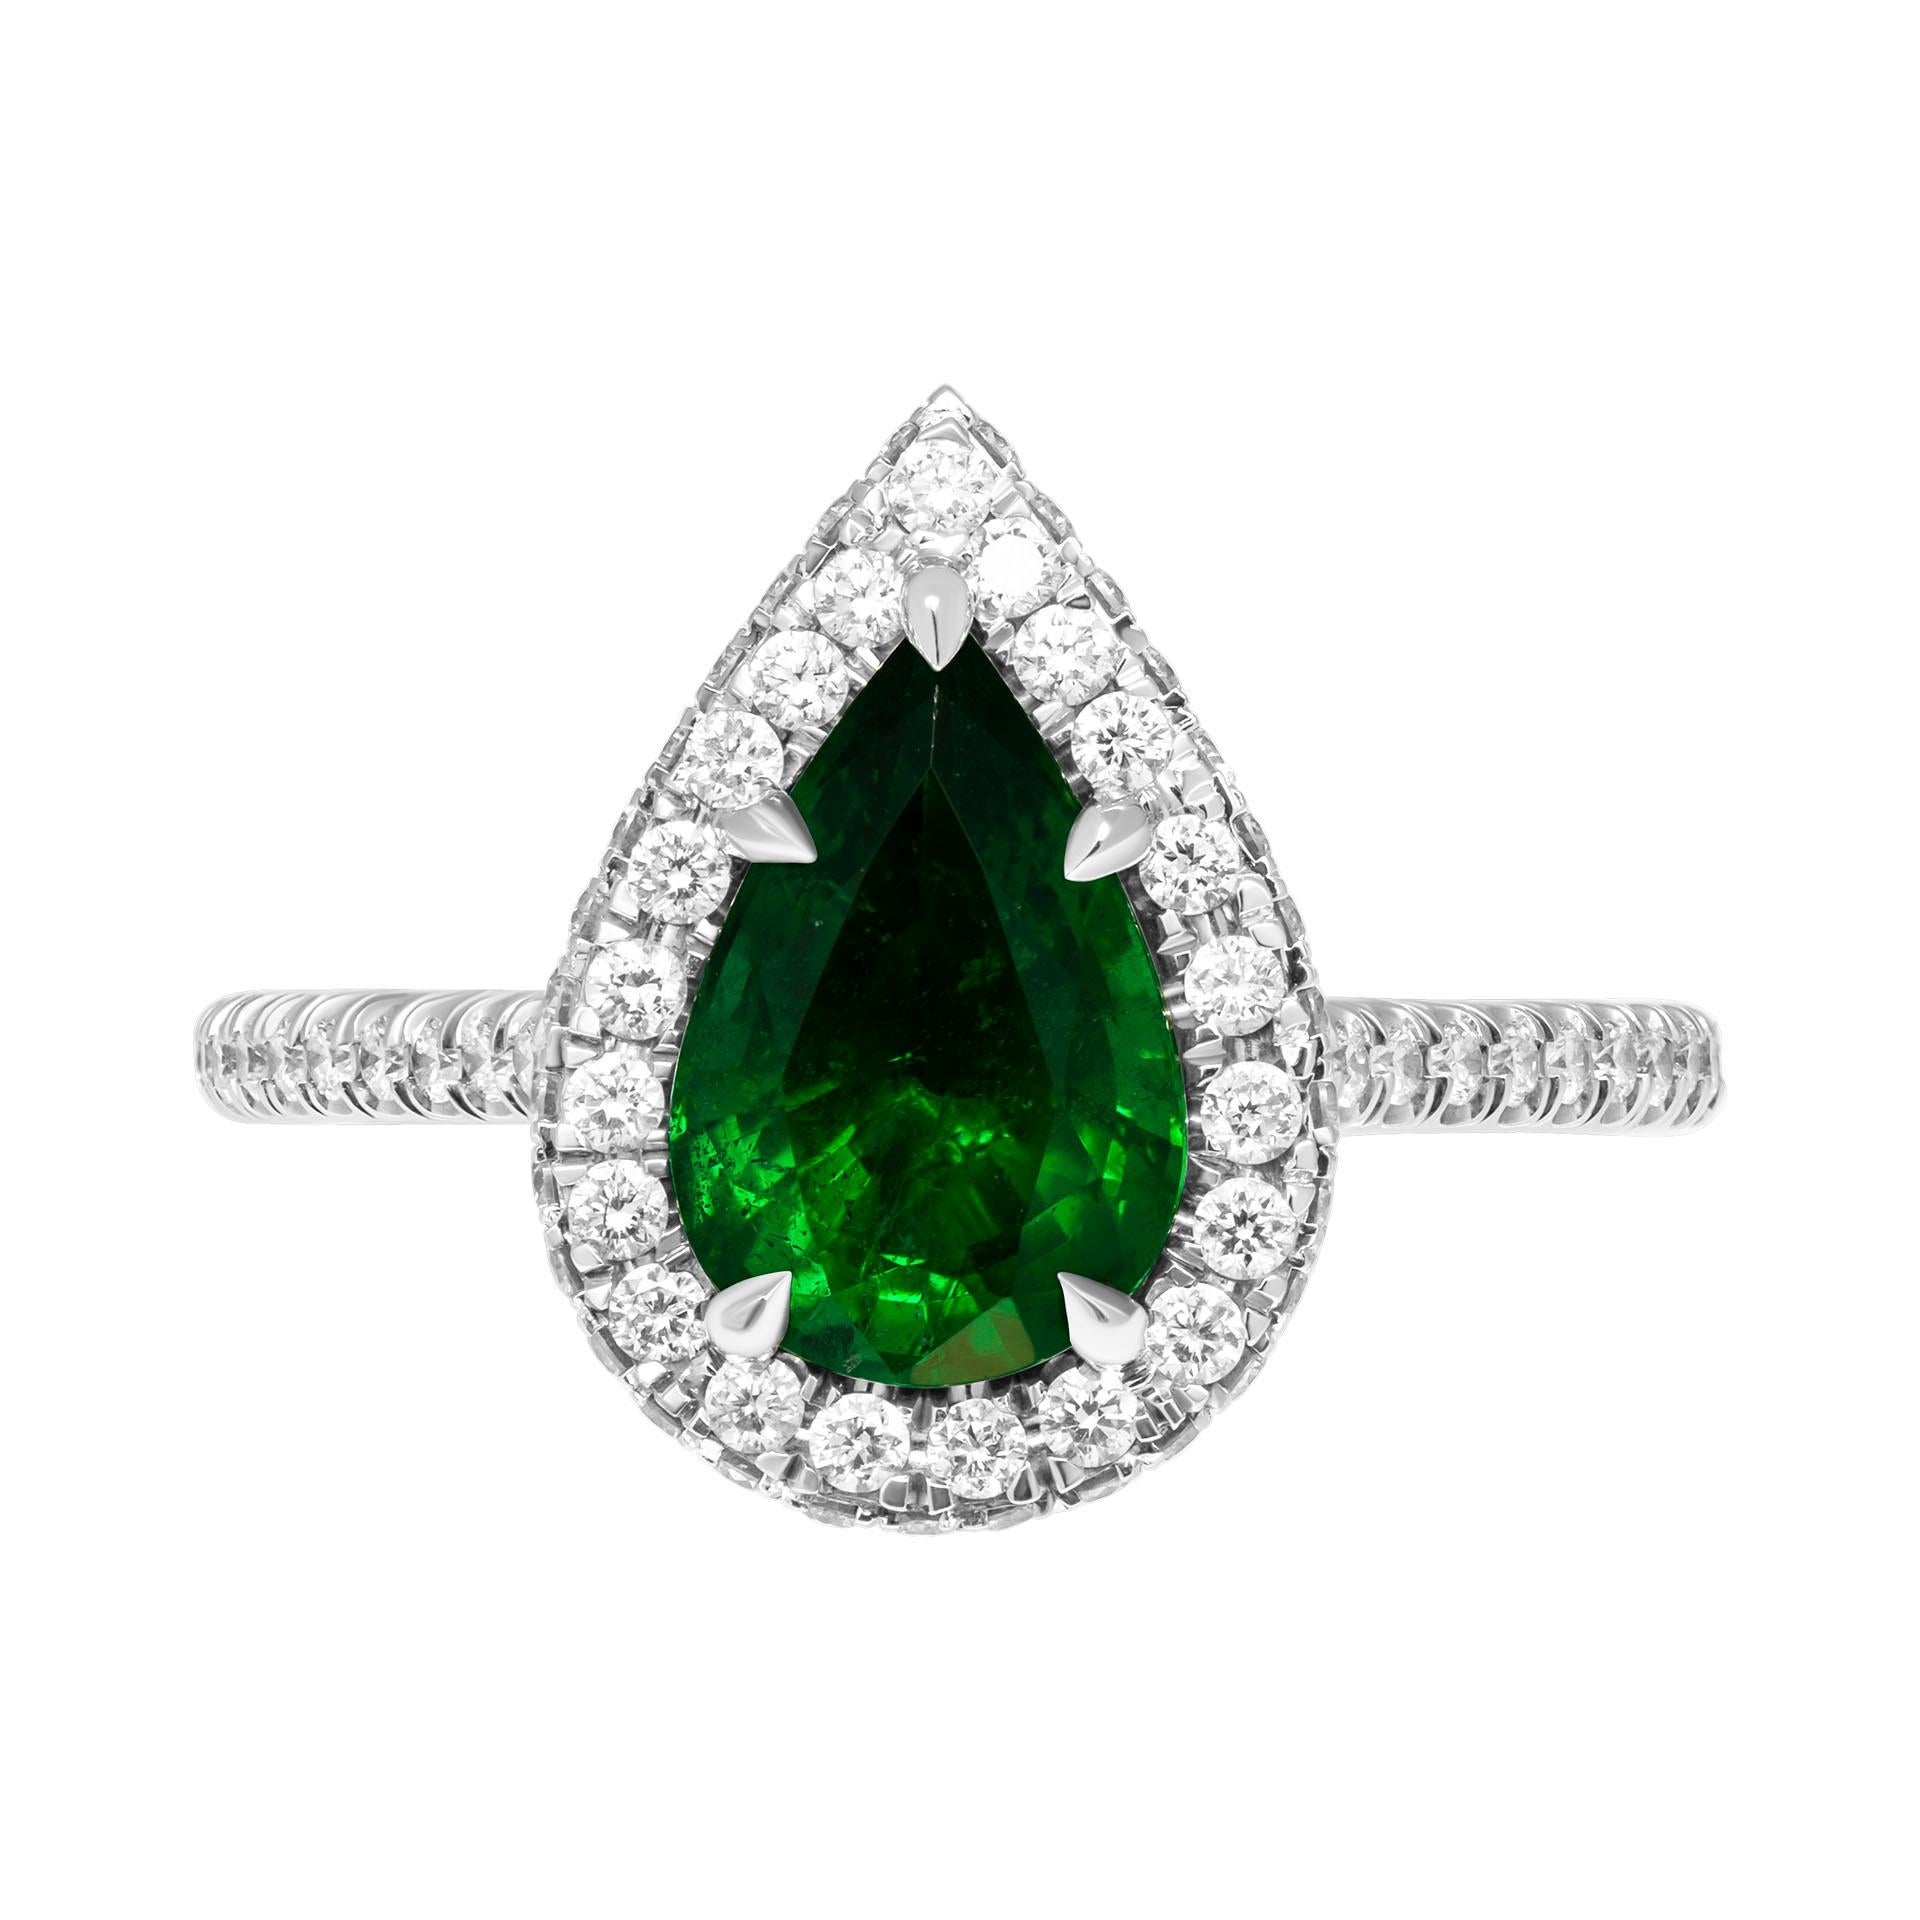 GIA Certified Cocktail Ring with 1.83ct Pear Shaped Green Emerald
Set with 0.87ct of small full brilliant cut diamonds
Size 7.75 (can be sized)
**emerald is oil treated